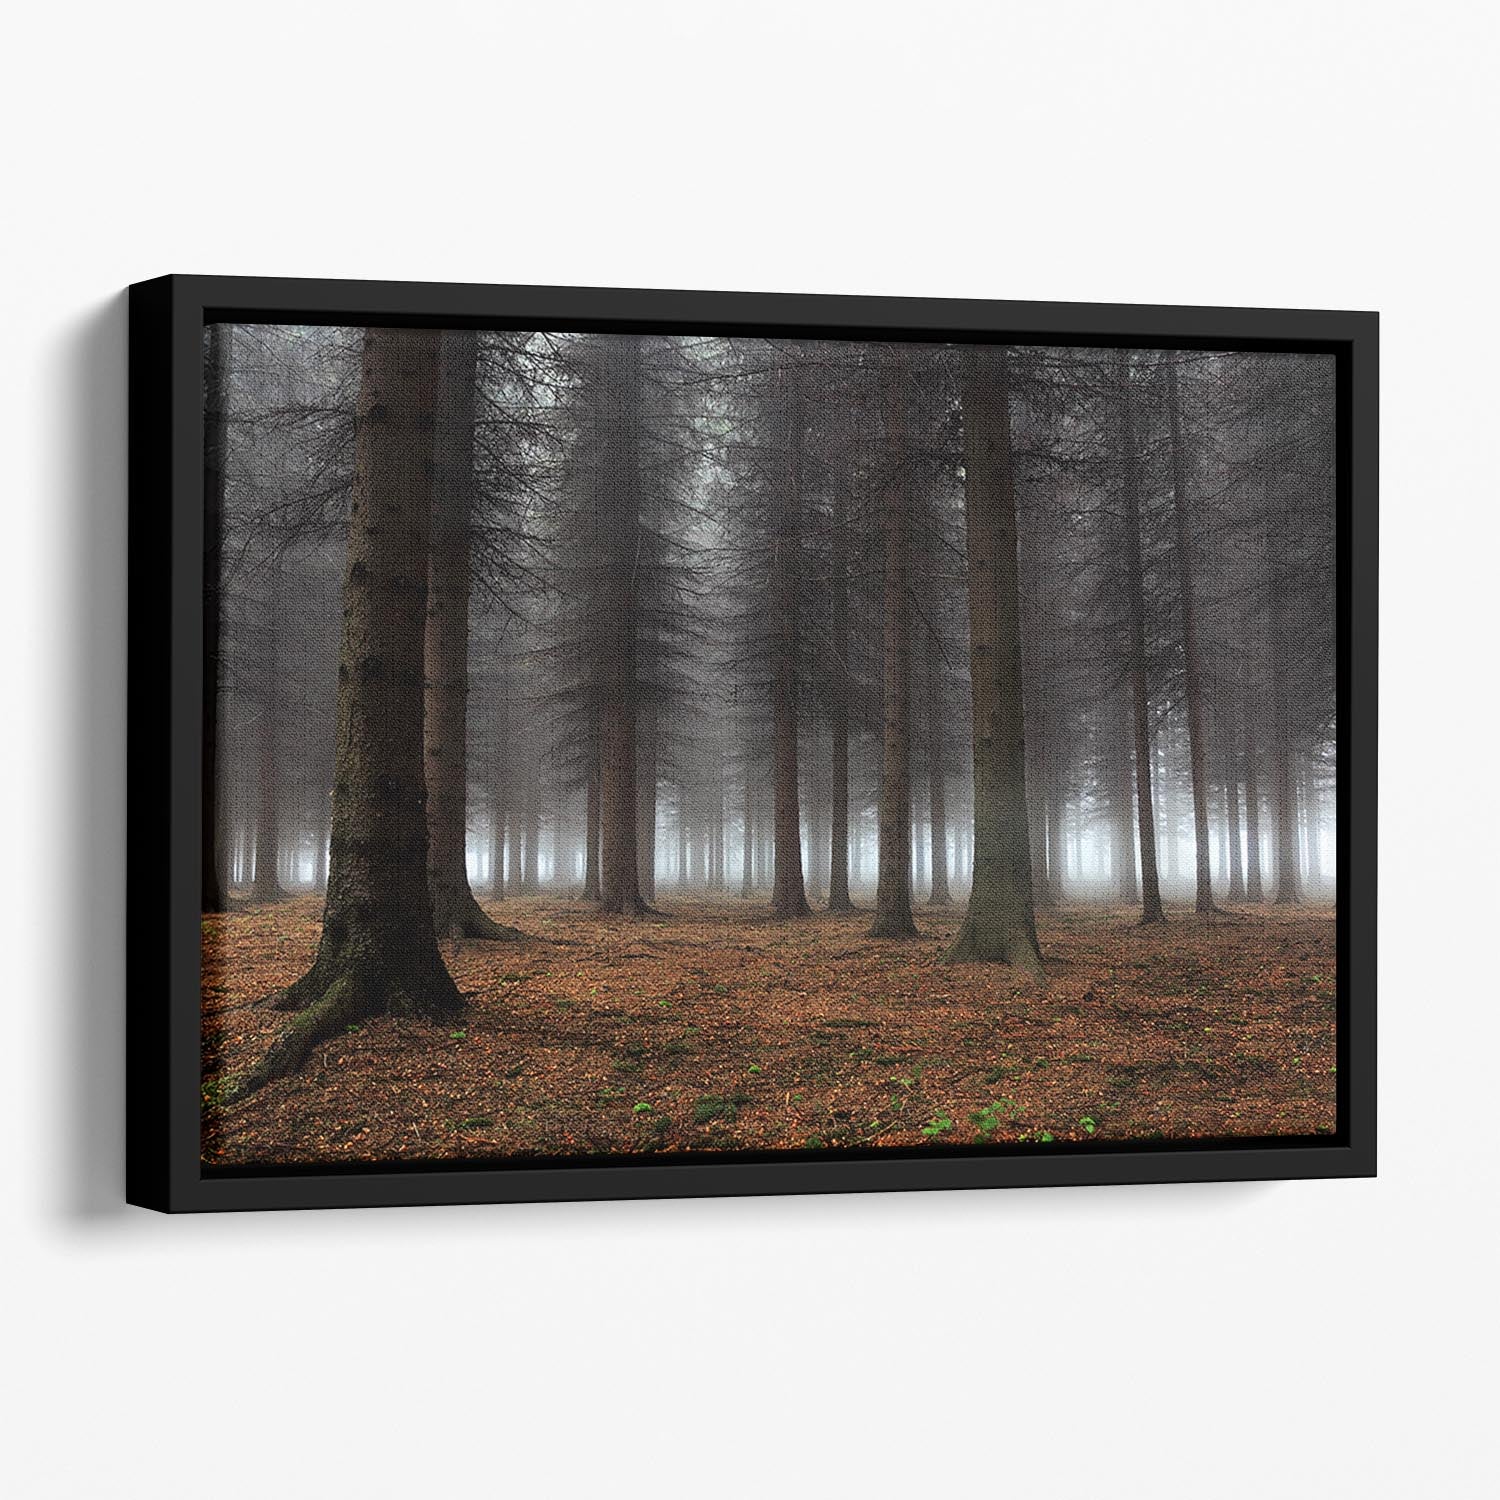 Place Of Silence Floating Framed Canvas - Canvas Art Rocks - 1